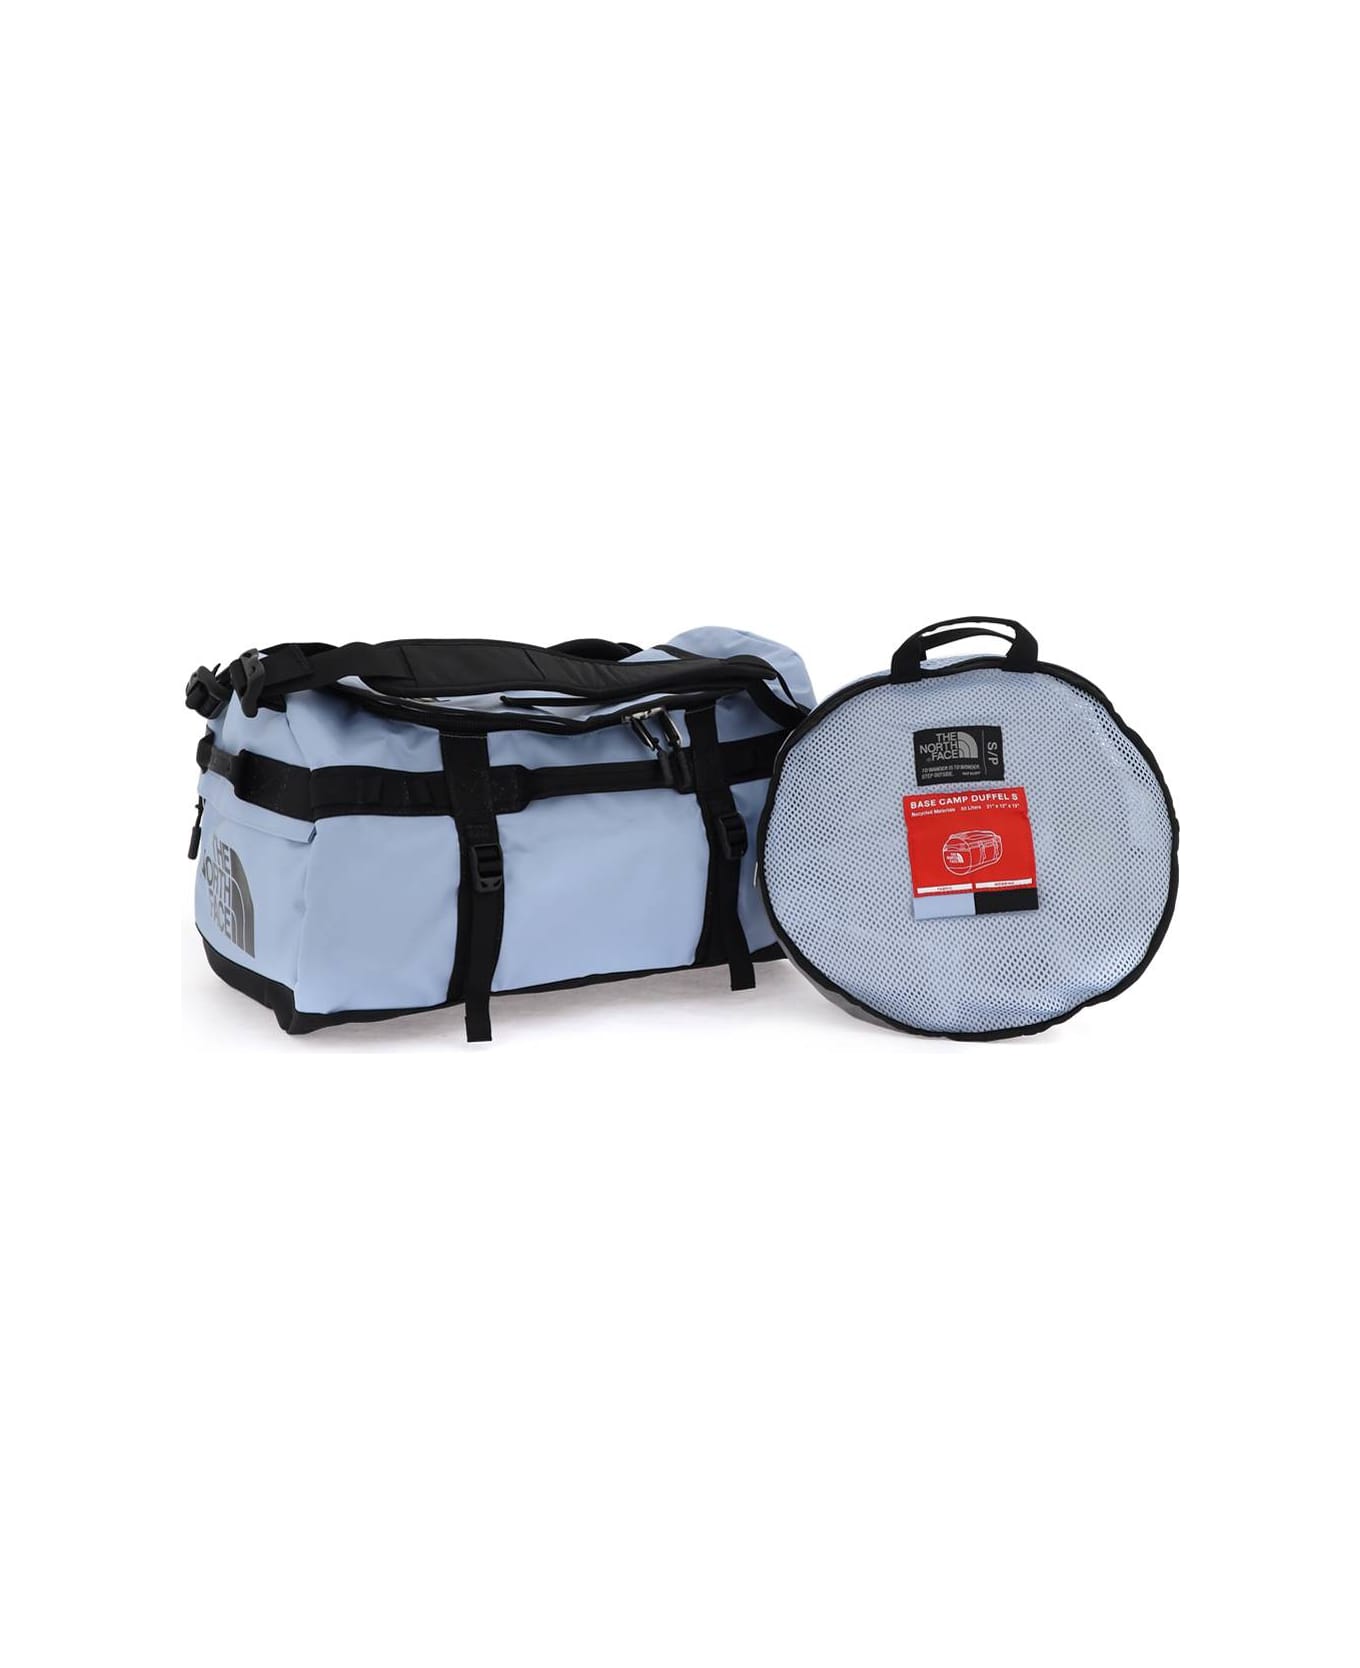 The North Face Small Base Camp Duffel Bag - STEEL BLUE TNF BLACK (Light blue)